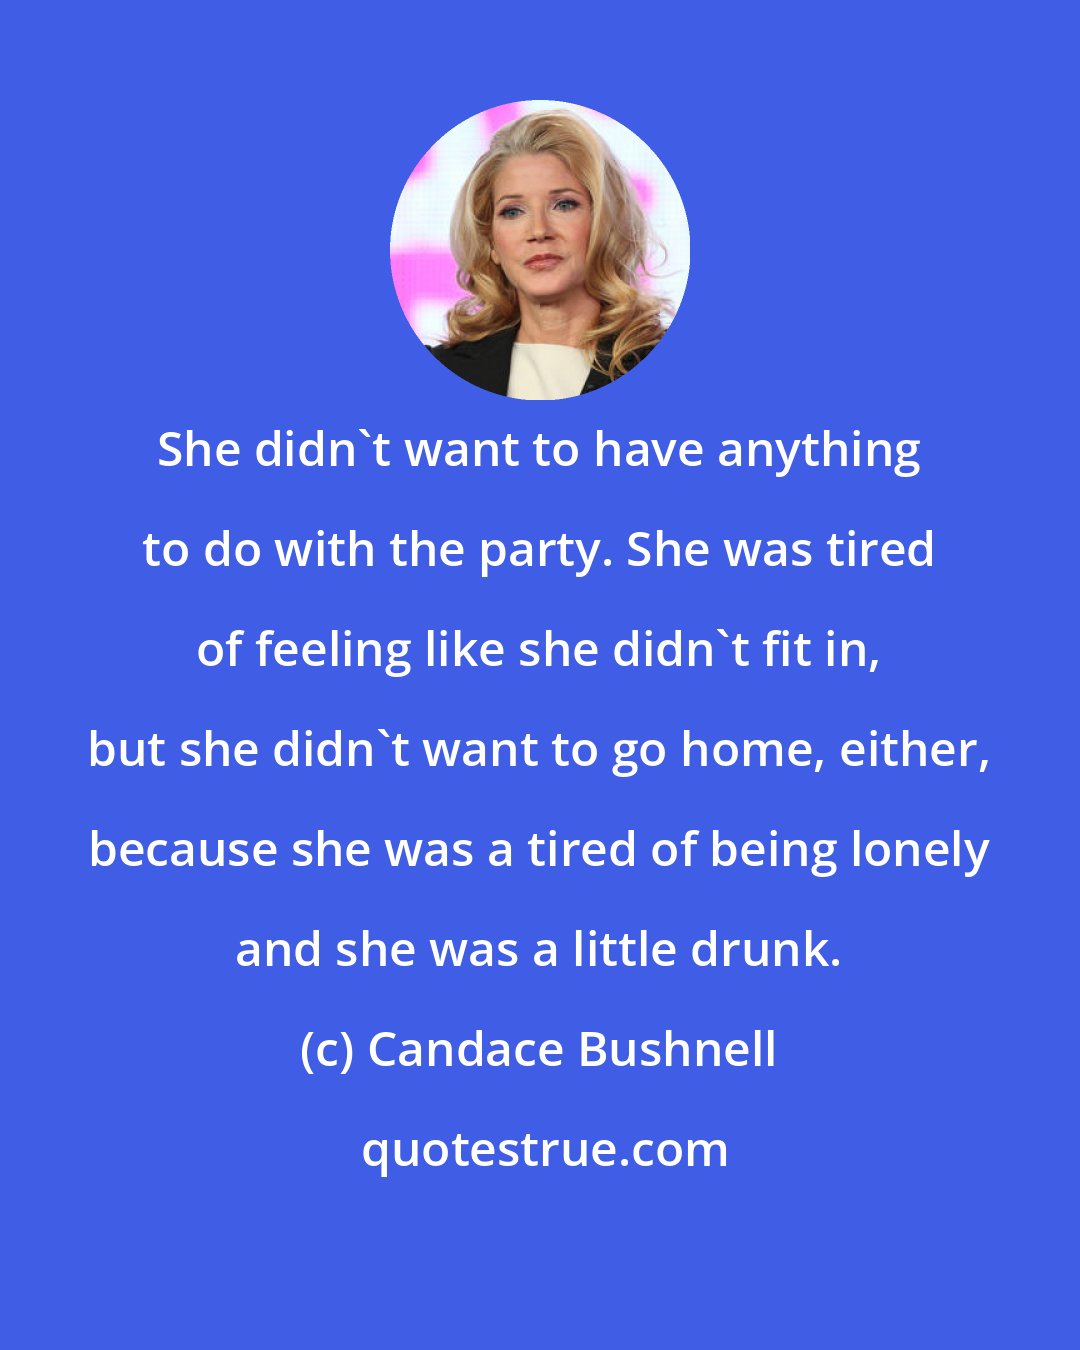 Candace Bushnell: She didn't want to have anything to do with the party. She was tired of feeling like she didn't fit in, but she didn't want to go home, either, because she was a tired of being lonely and she was a little drunk.